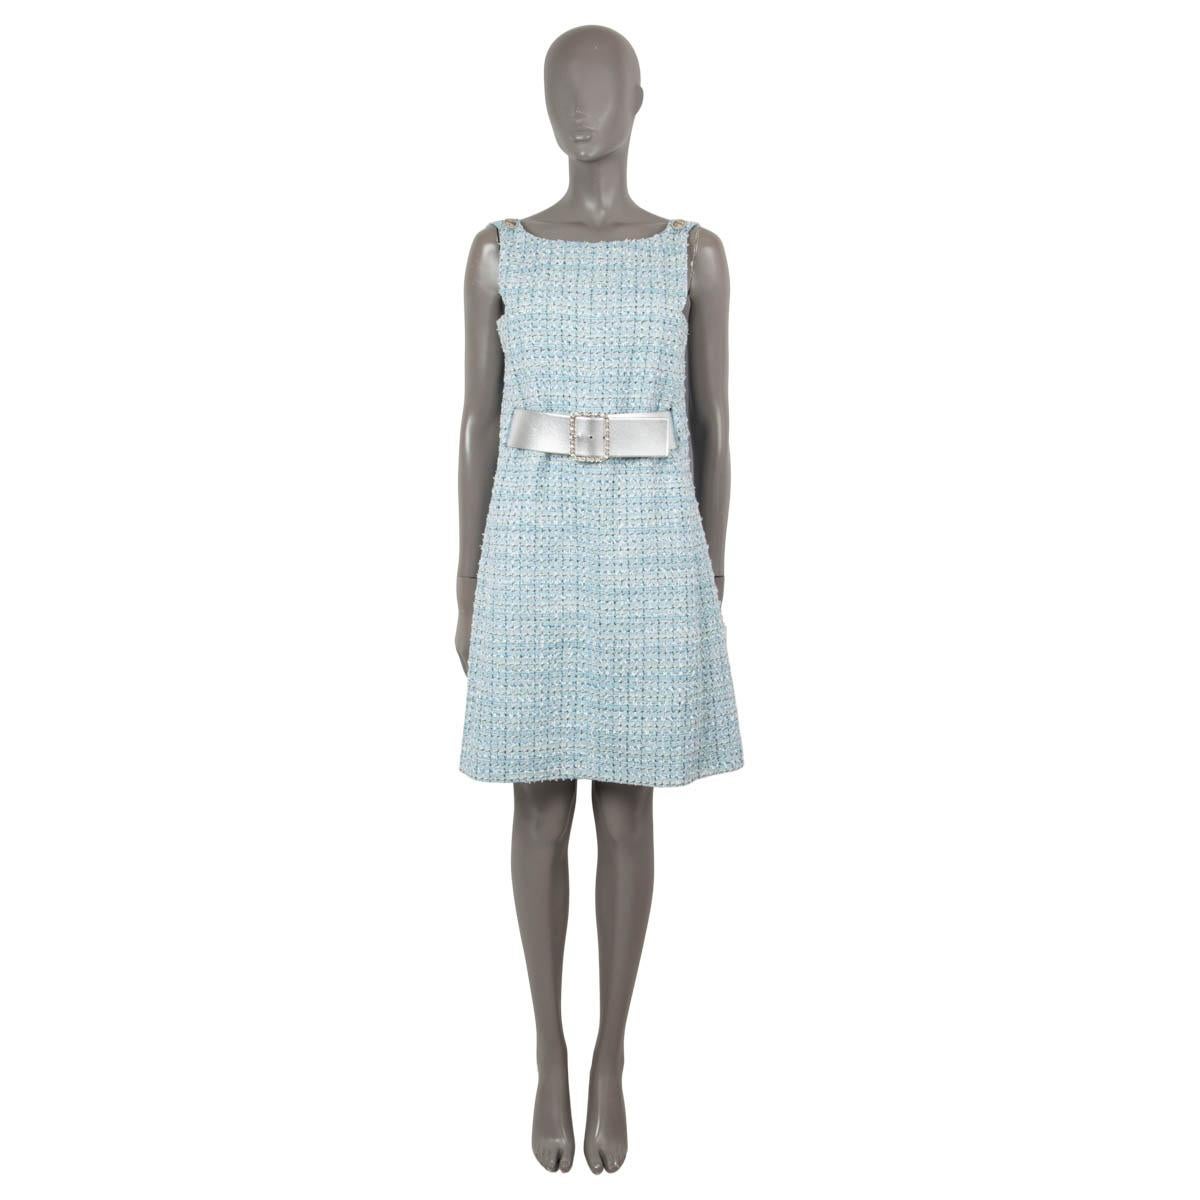 100% authentic Chanel sleeveless tweed dress in blue, turquoise, white and navy polyester (26%), cotton (25%), linen (18%), acetate (10%), metallized fibers (8%), viscose (7%) and polyamide (6%). Features a metallic silver wide lambskin leather belt